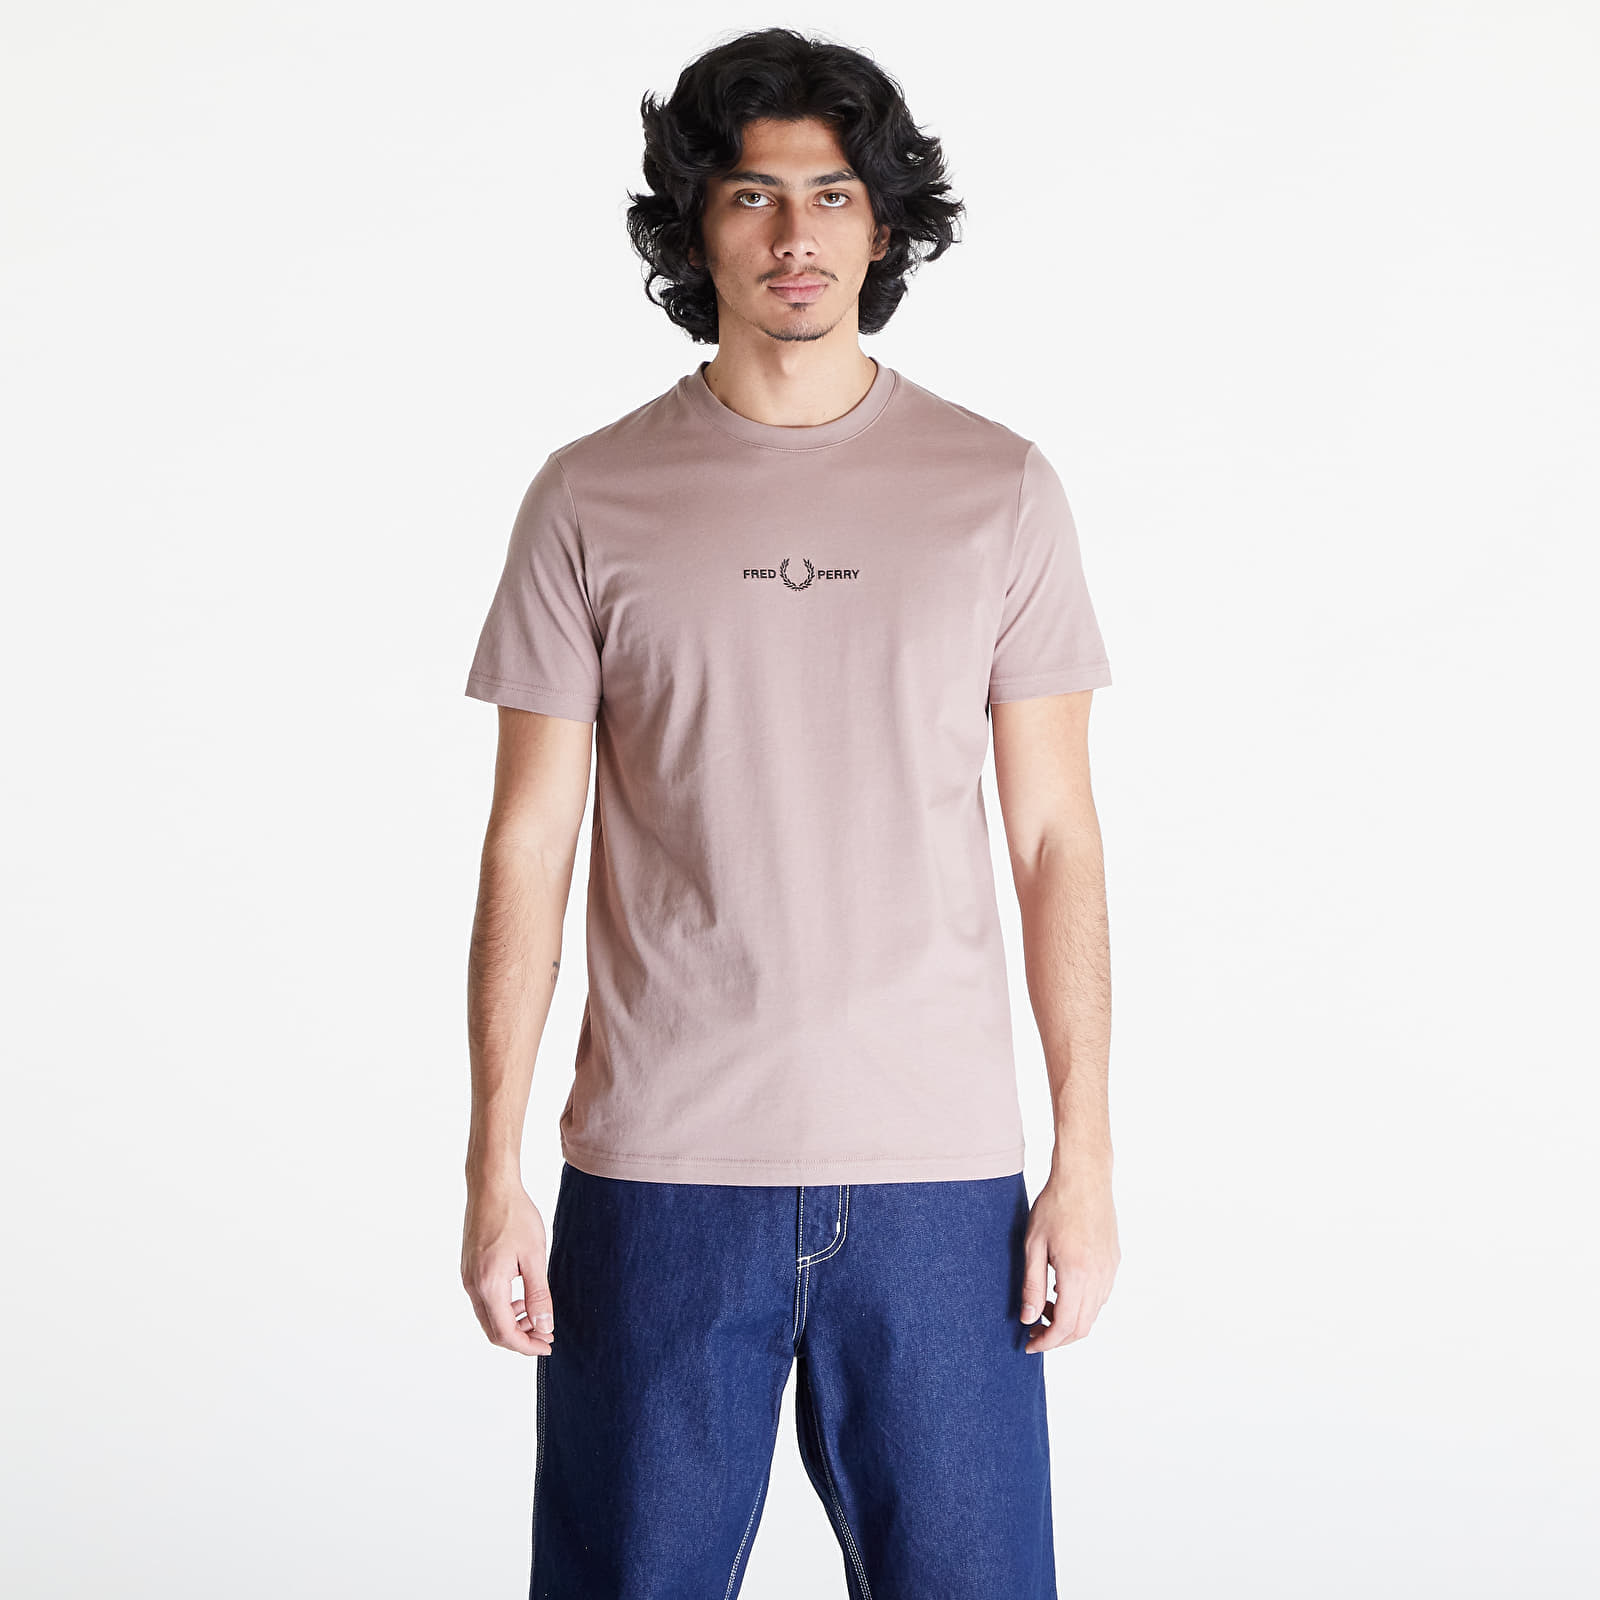 FRED PERRY - embroidered t-shirt dark pink